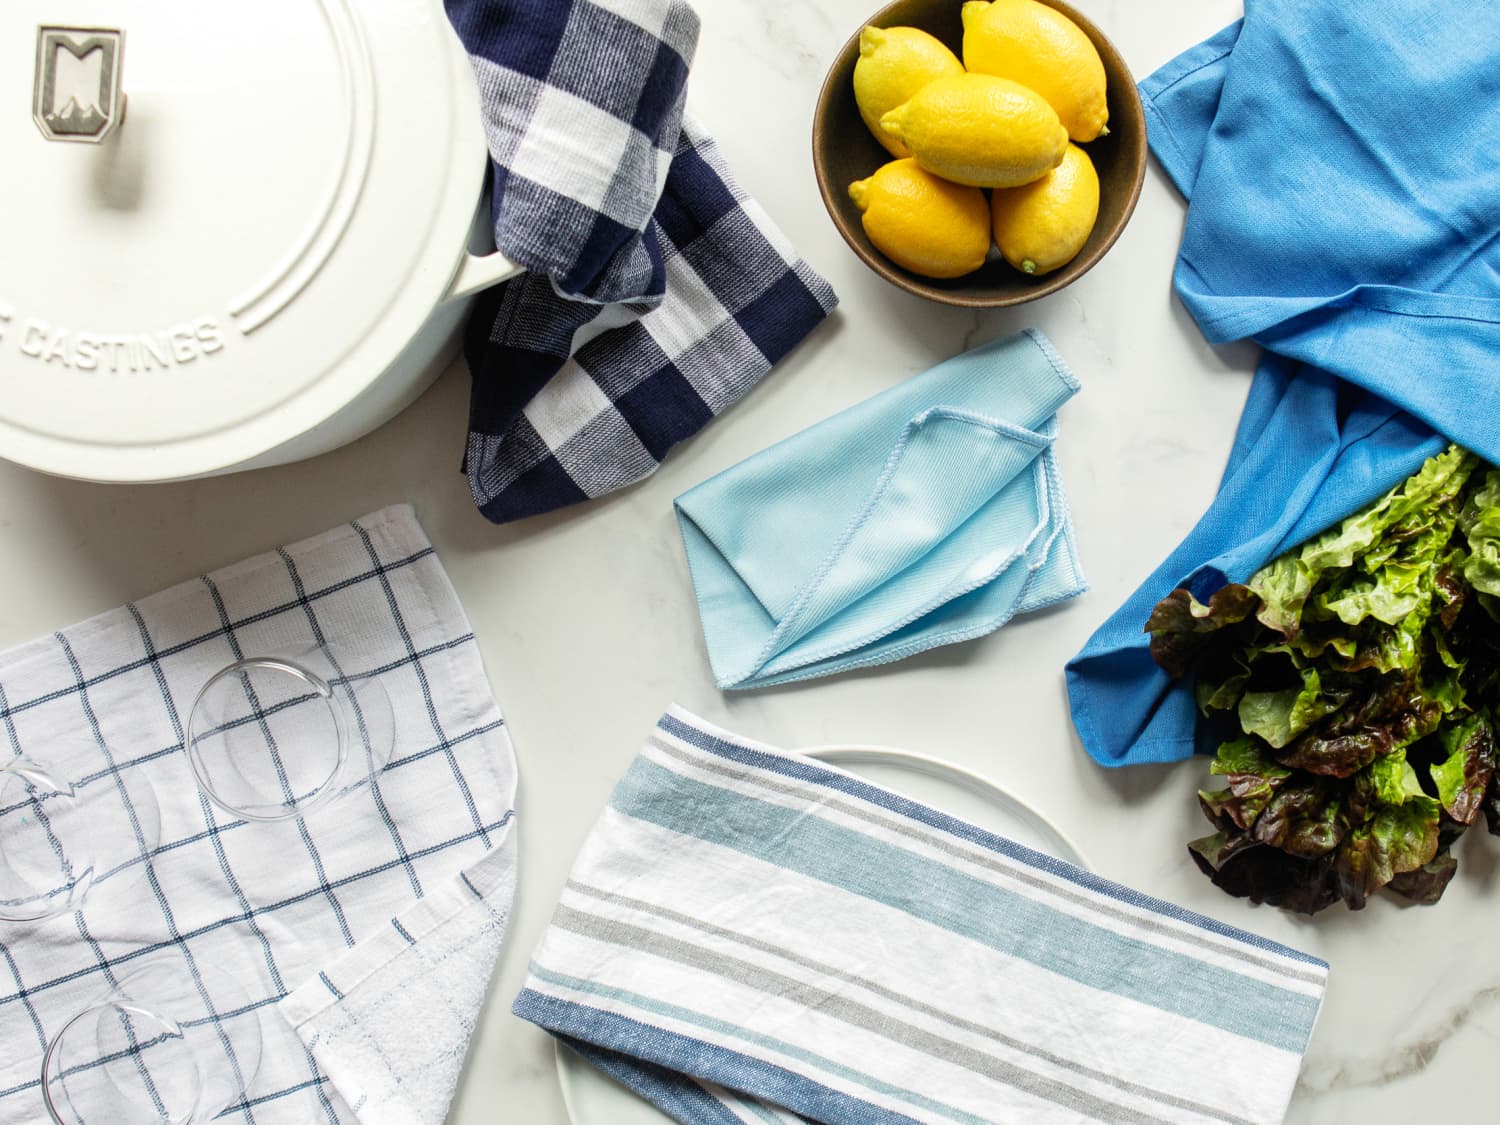 Shoppers Call These 'Super Absorbent' Dish Cloths That Are Under $1 Apiece  'Game Changers